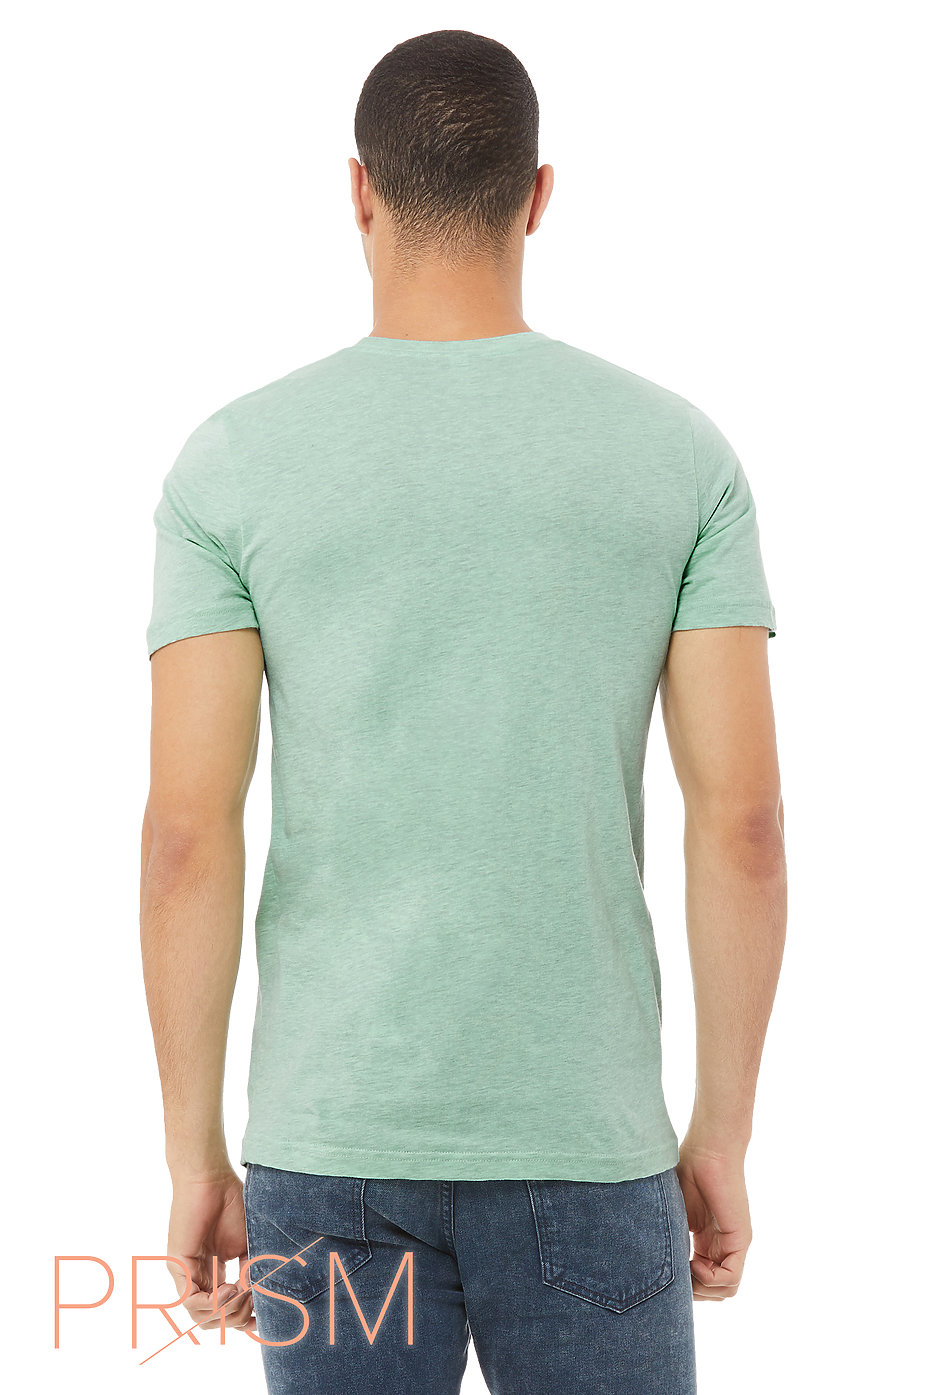 Download Heathered Shirt | Mens Wholesale Clothing | Heather T ...